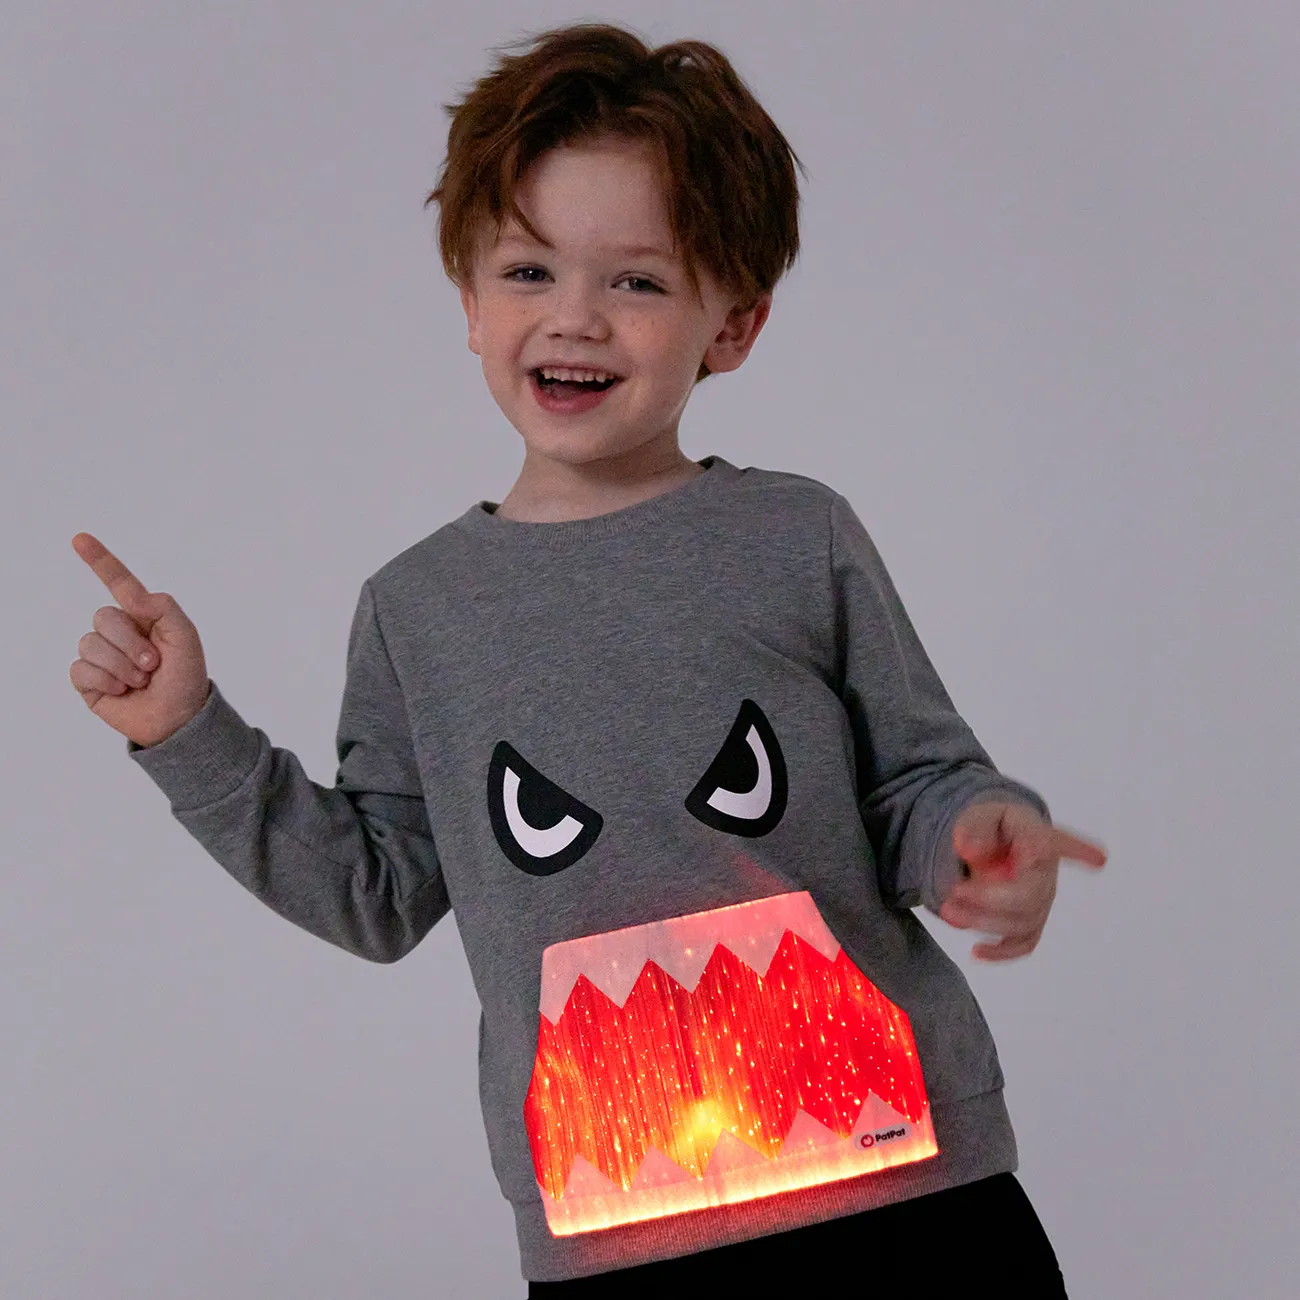 Go-Glow Illuminating Sweatshirt with Light Up Monster Mouth Including Controller (Built-In Battery) Grey big image 1